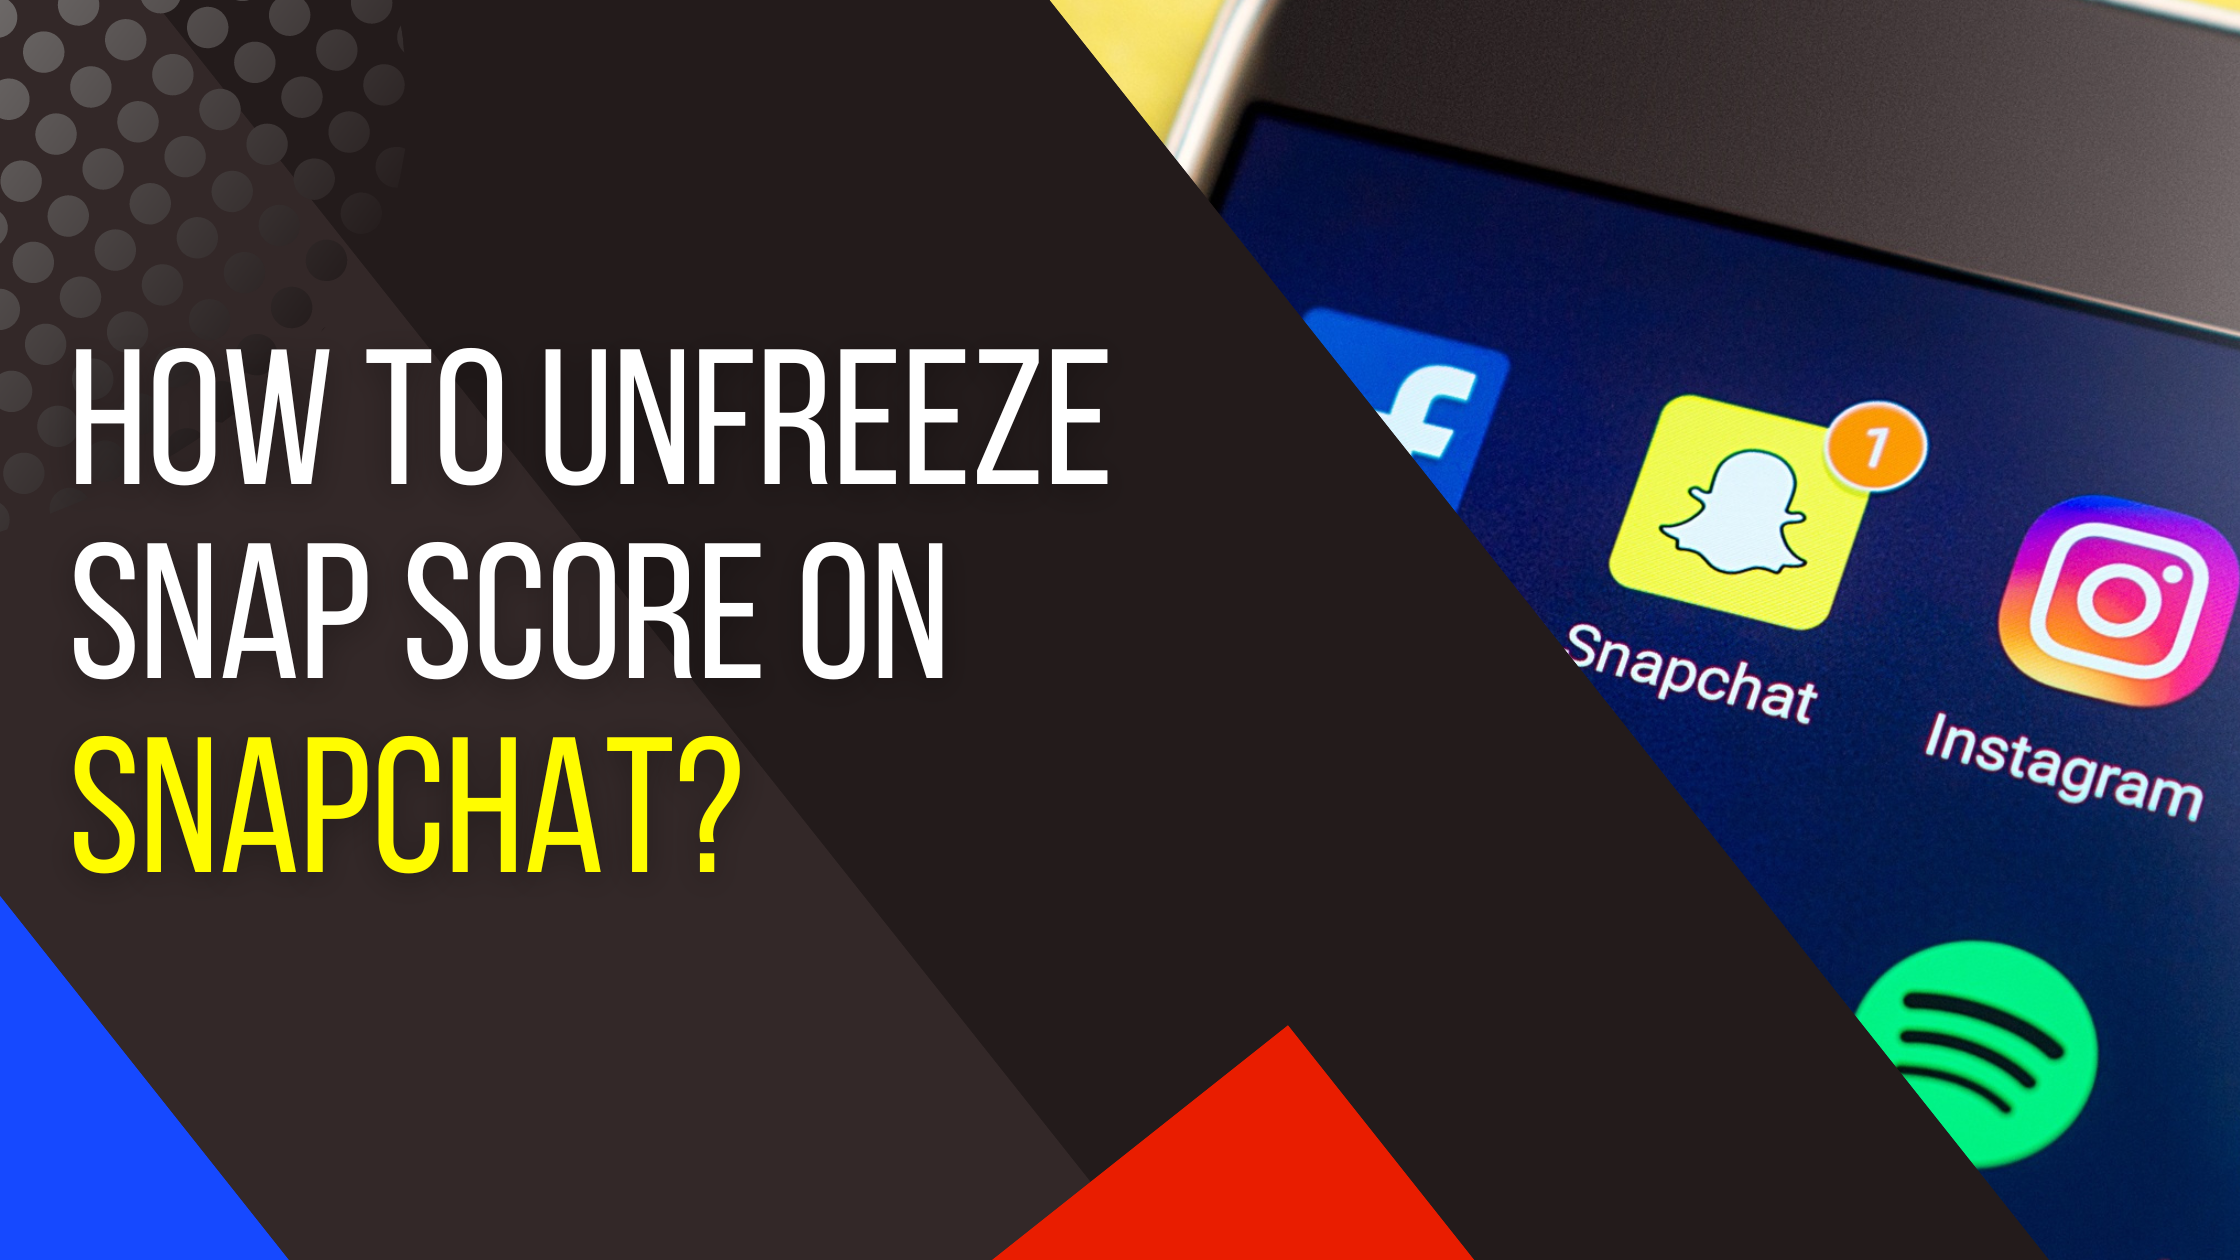 Remote.tools shares ultimate guide on how to unfreeze snap score on Snapchat